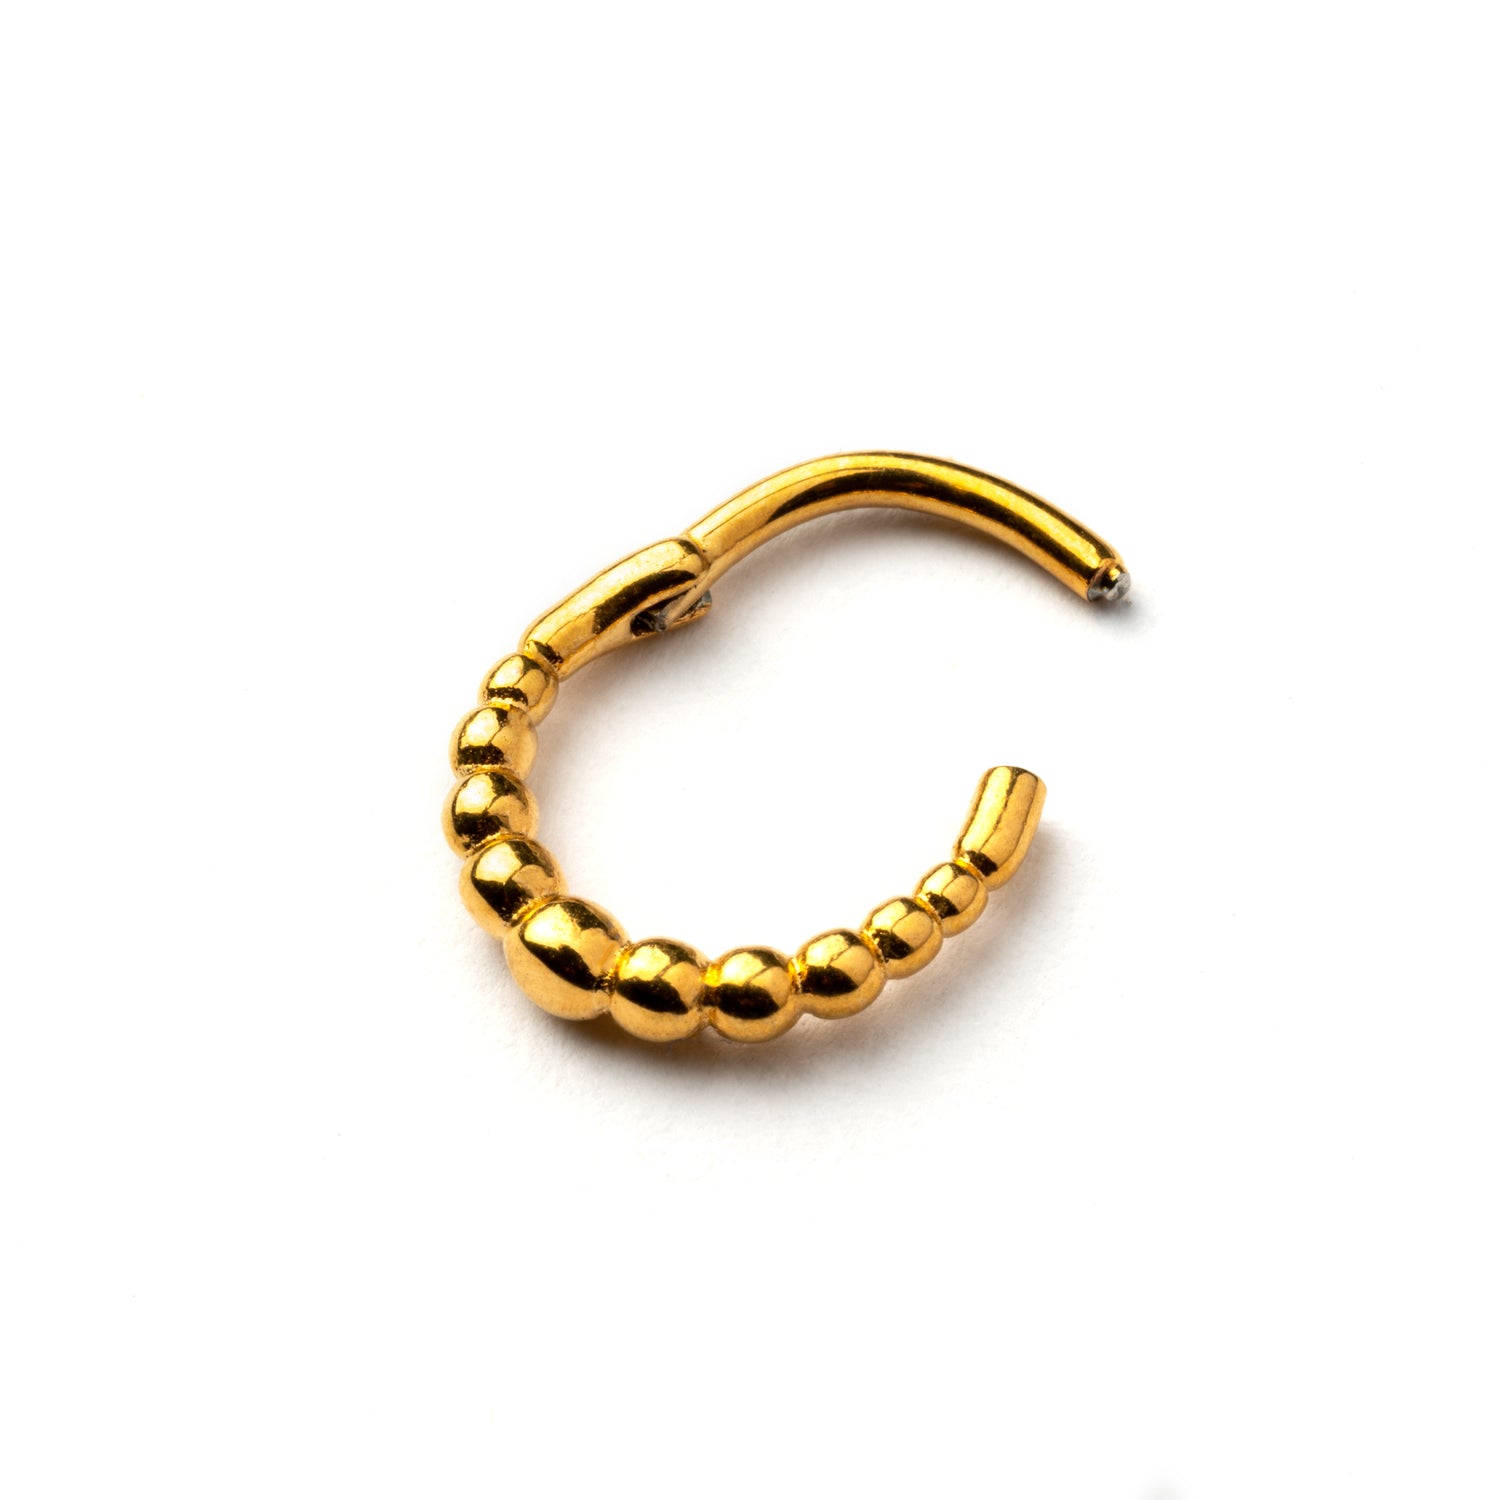 Golden surgical steel clicker piercing ring formed by tiny spheres hinged segment closure